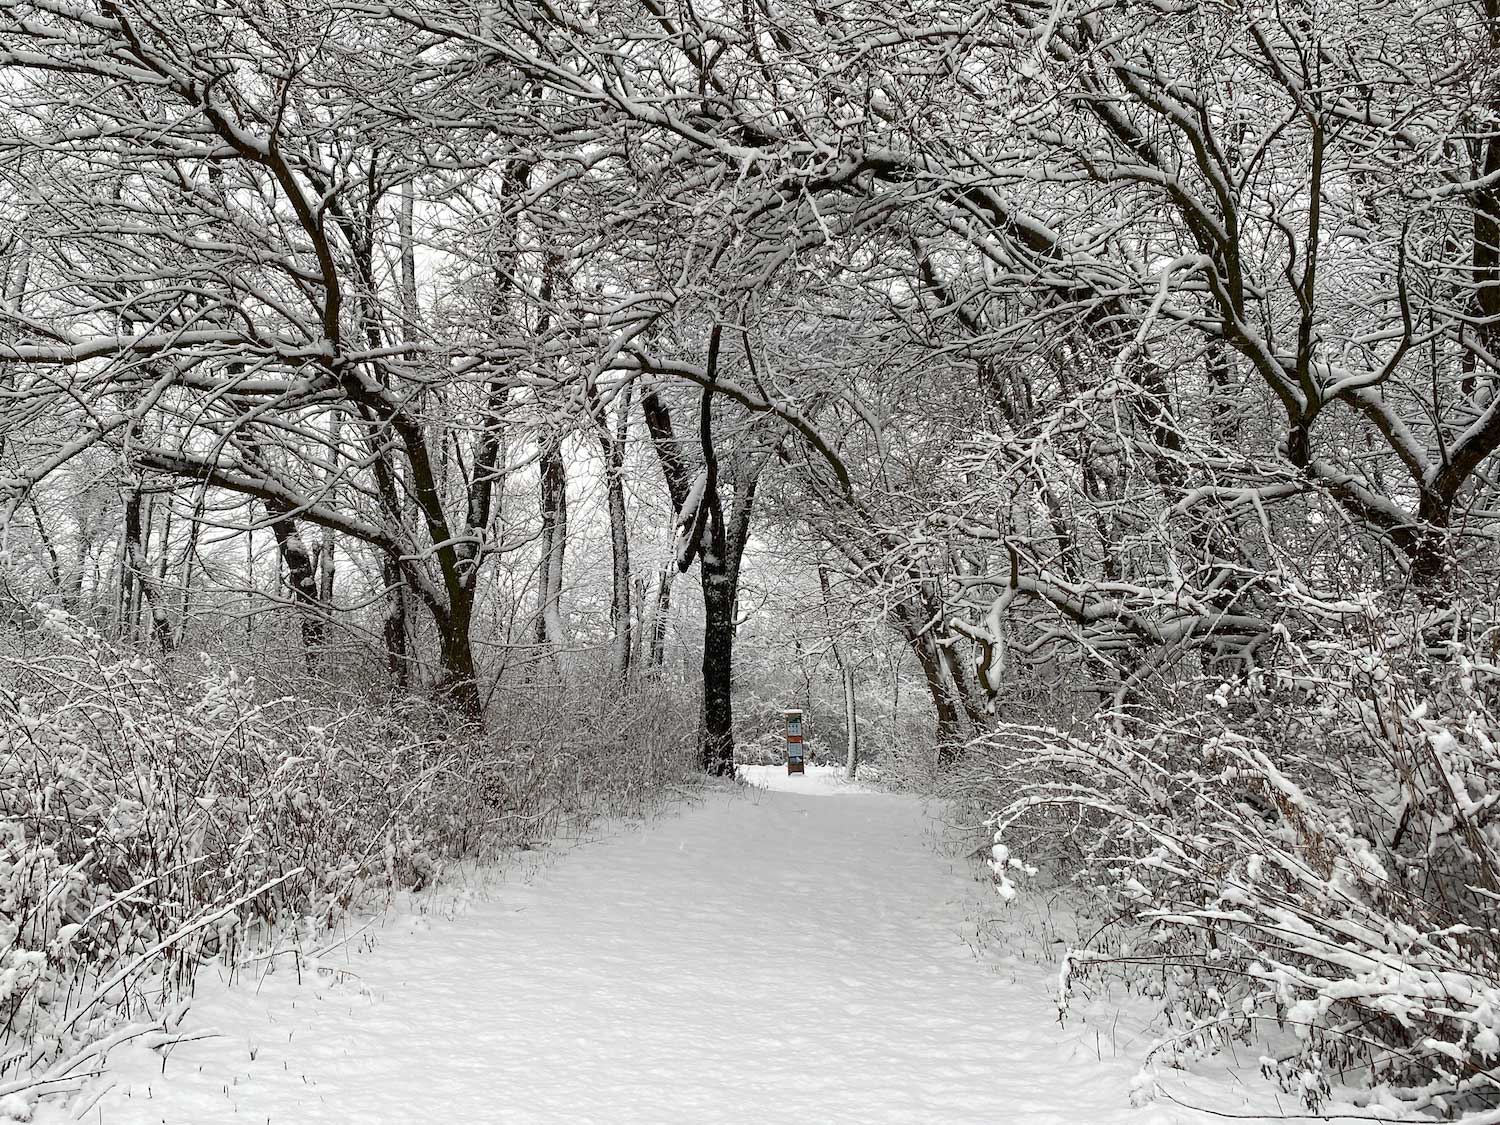 A snow-covered trail lined by snow-covered trees.